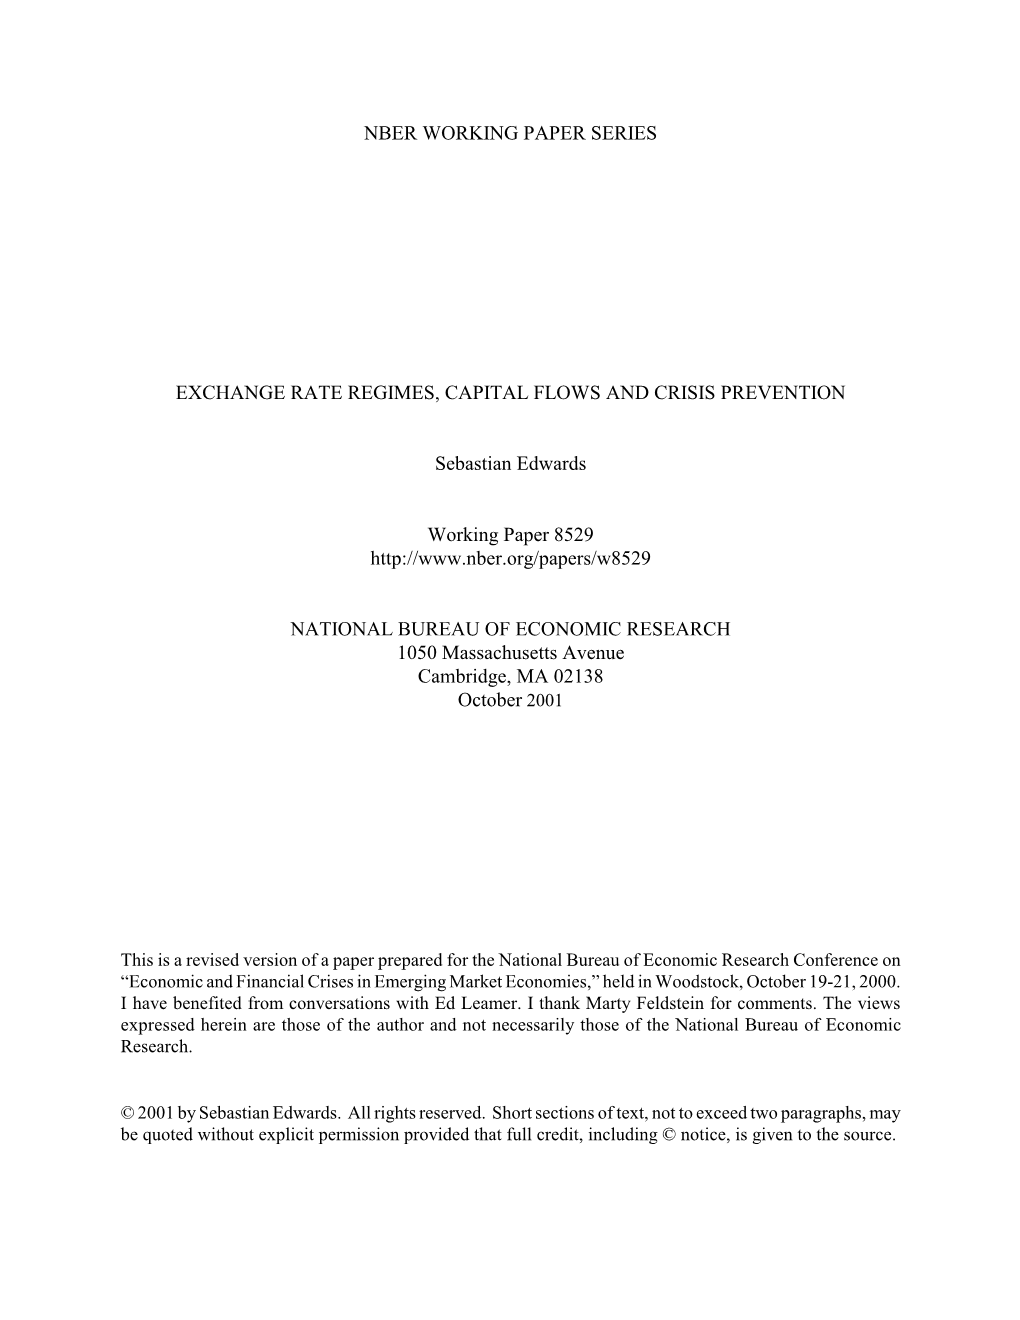 Exchange Rate Regimes, Capital Flows and Crisis Prevention